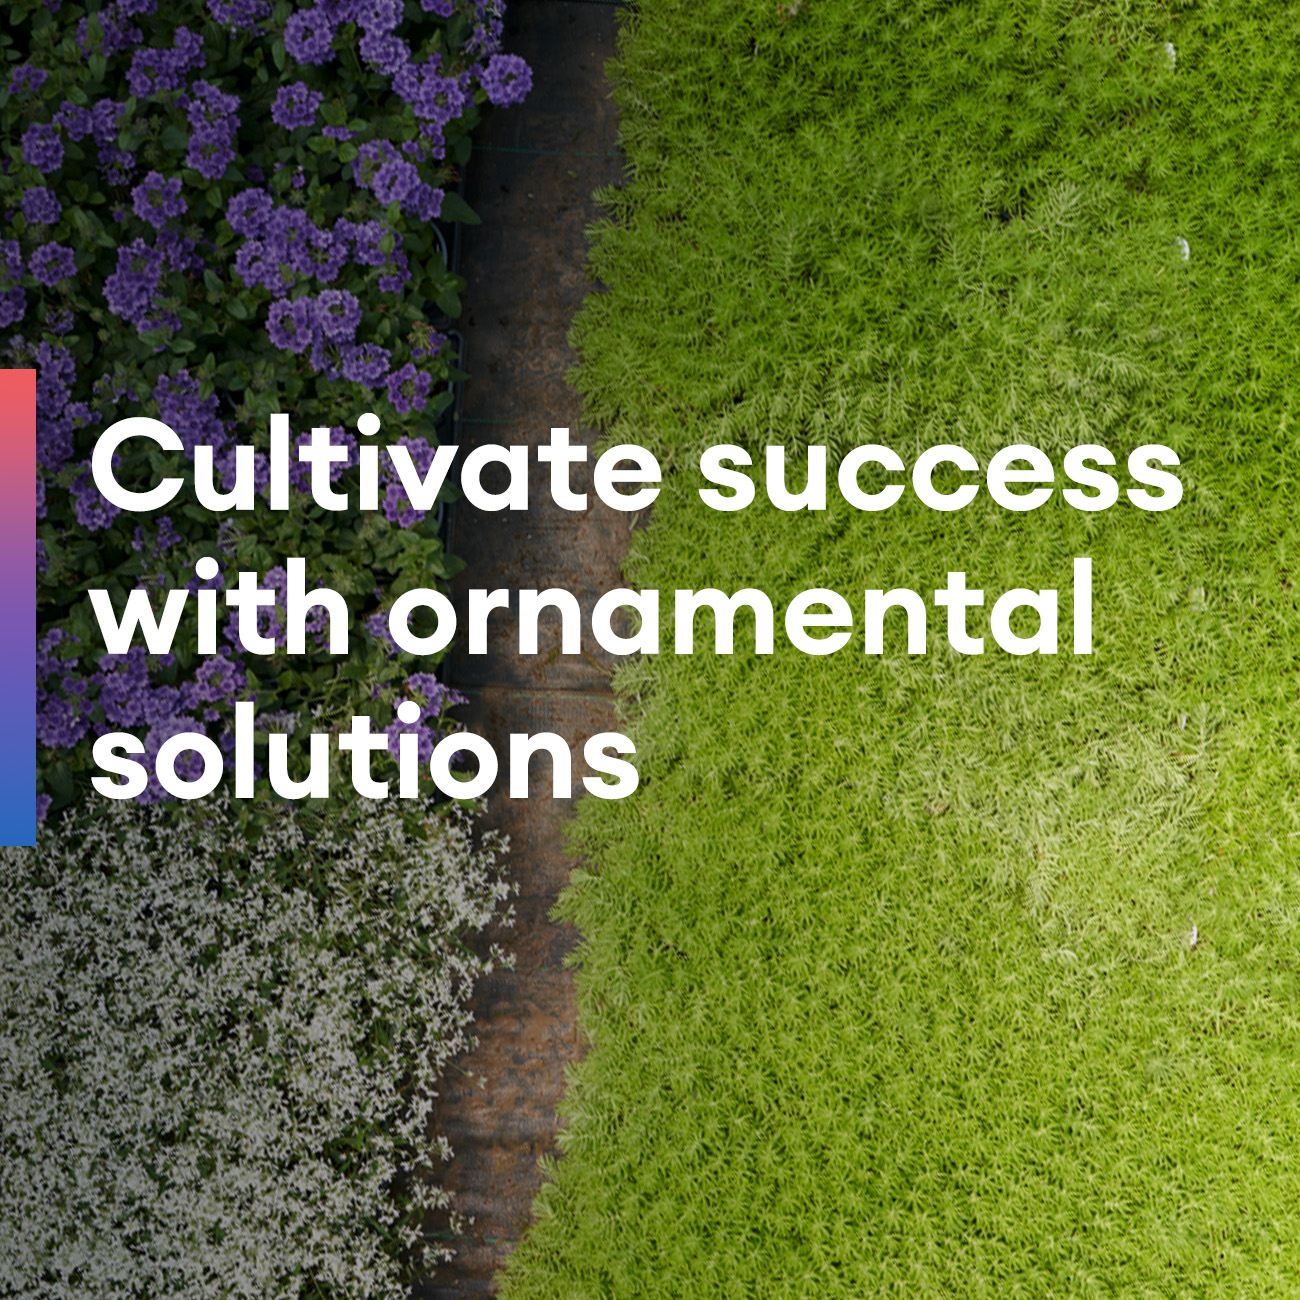 text Cultivate success with ornamental solutions image ornamentals from above